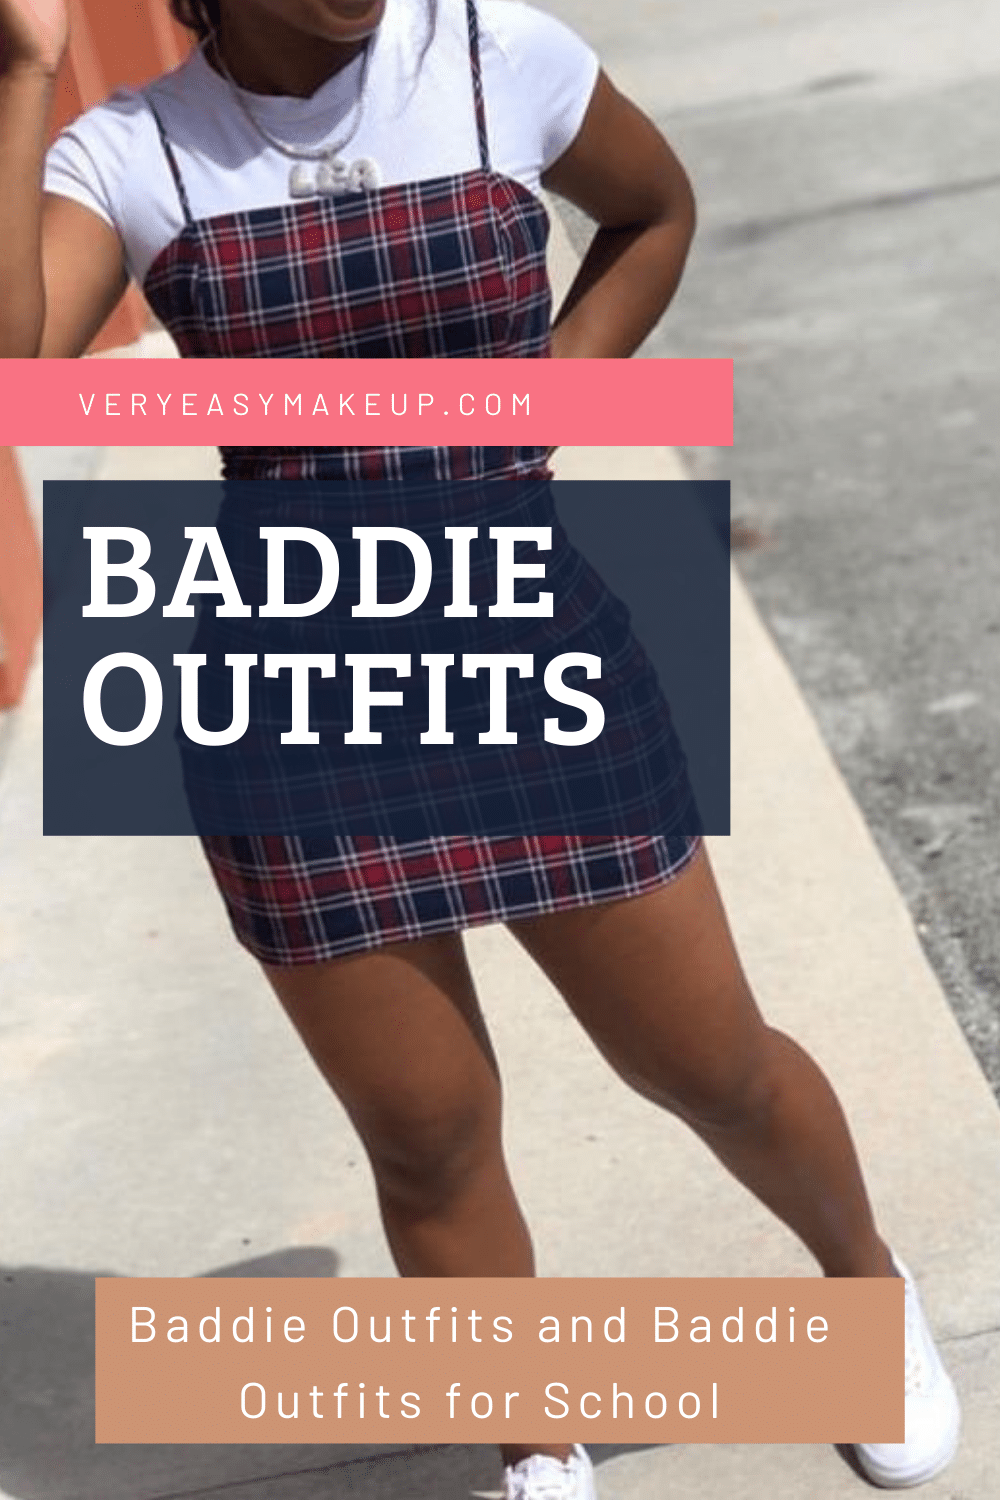 Baddie Outfits and Baddie Outfits for School